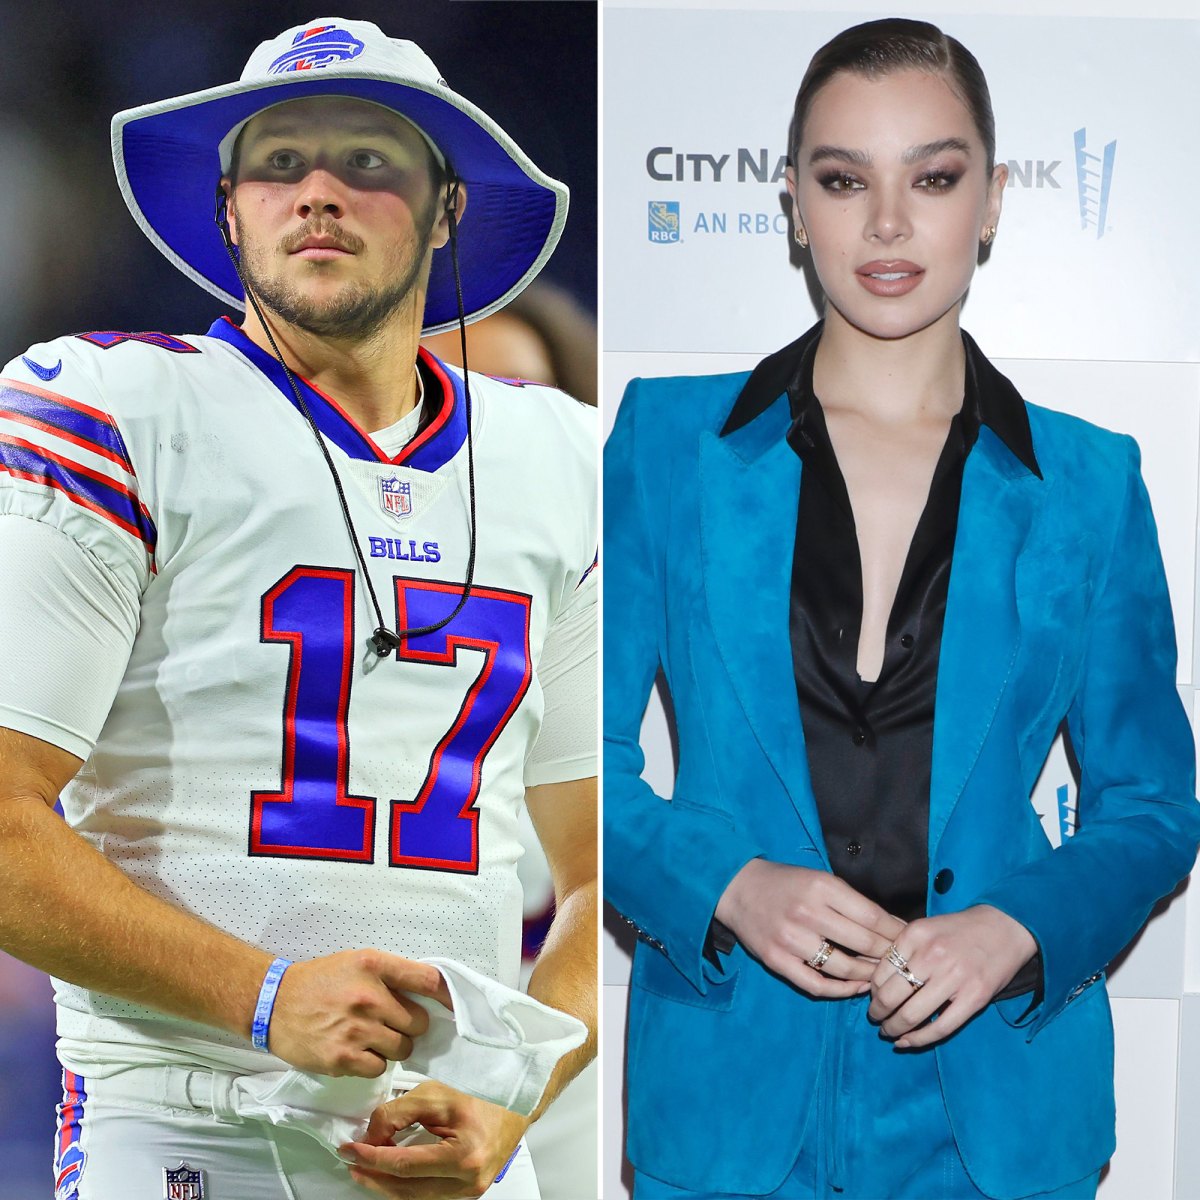 Josh Allen Opens Up About Hailee Steinfeld Romance for the 1st Time